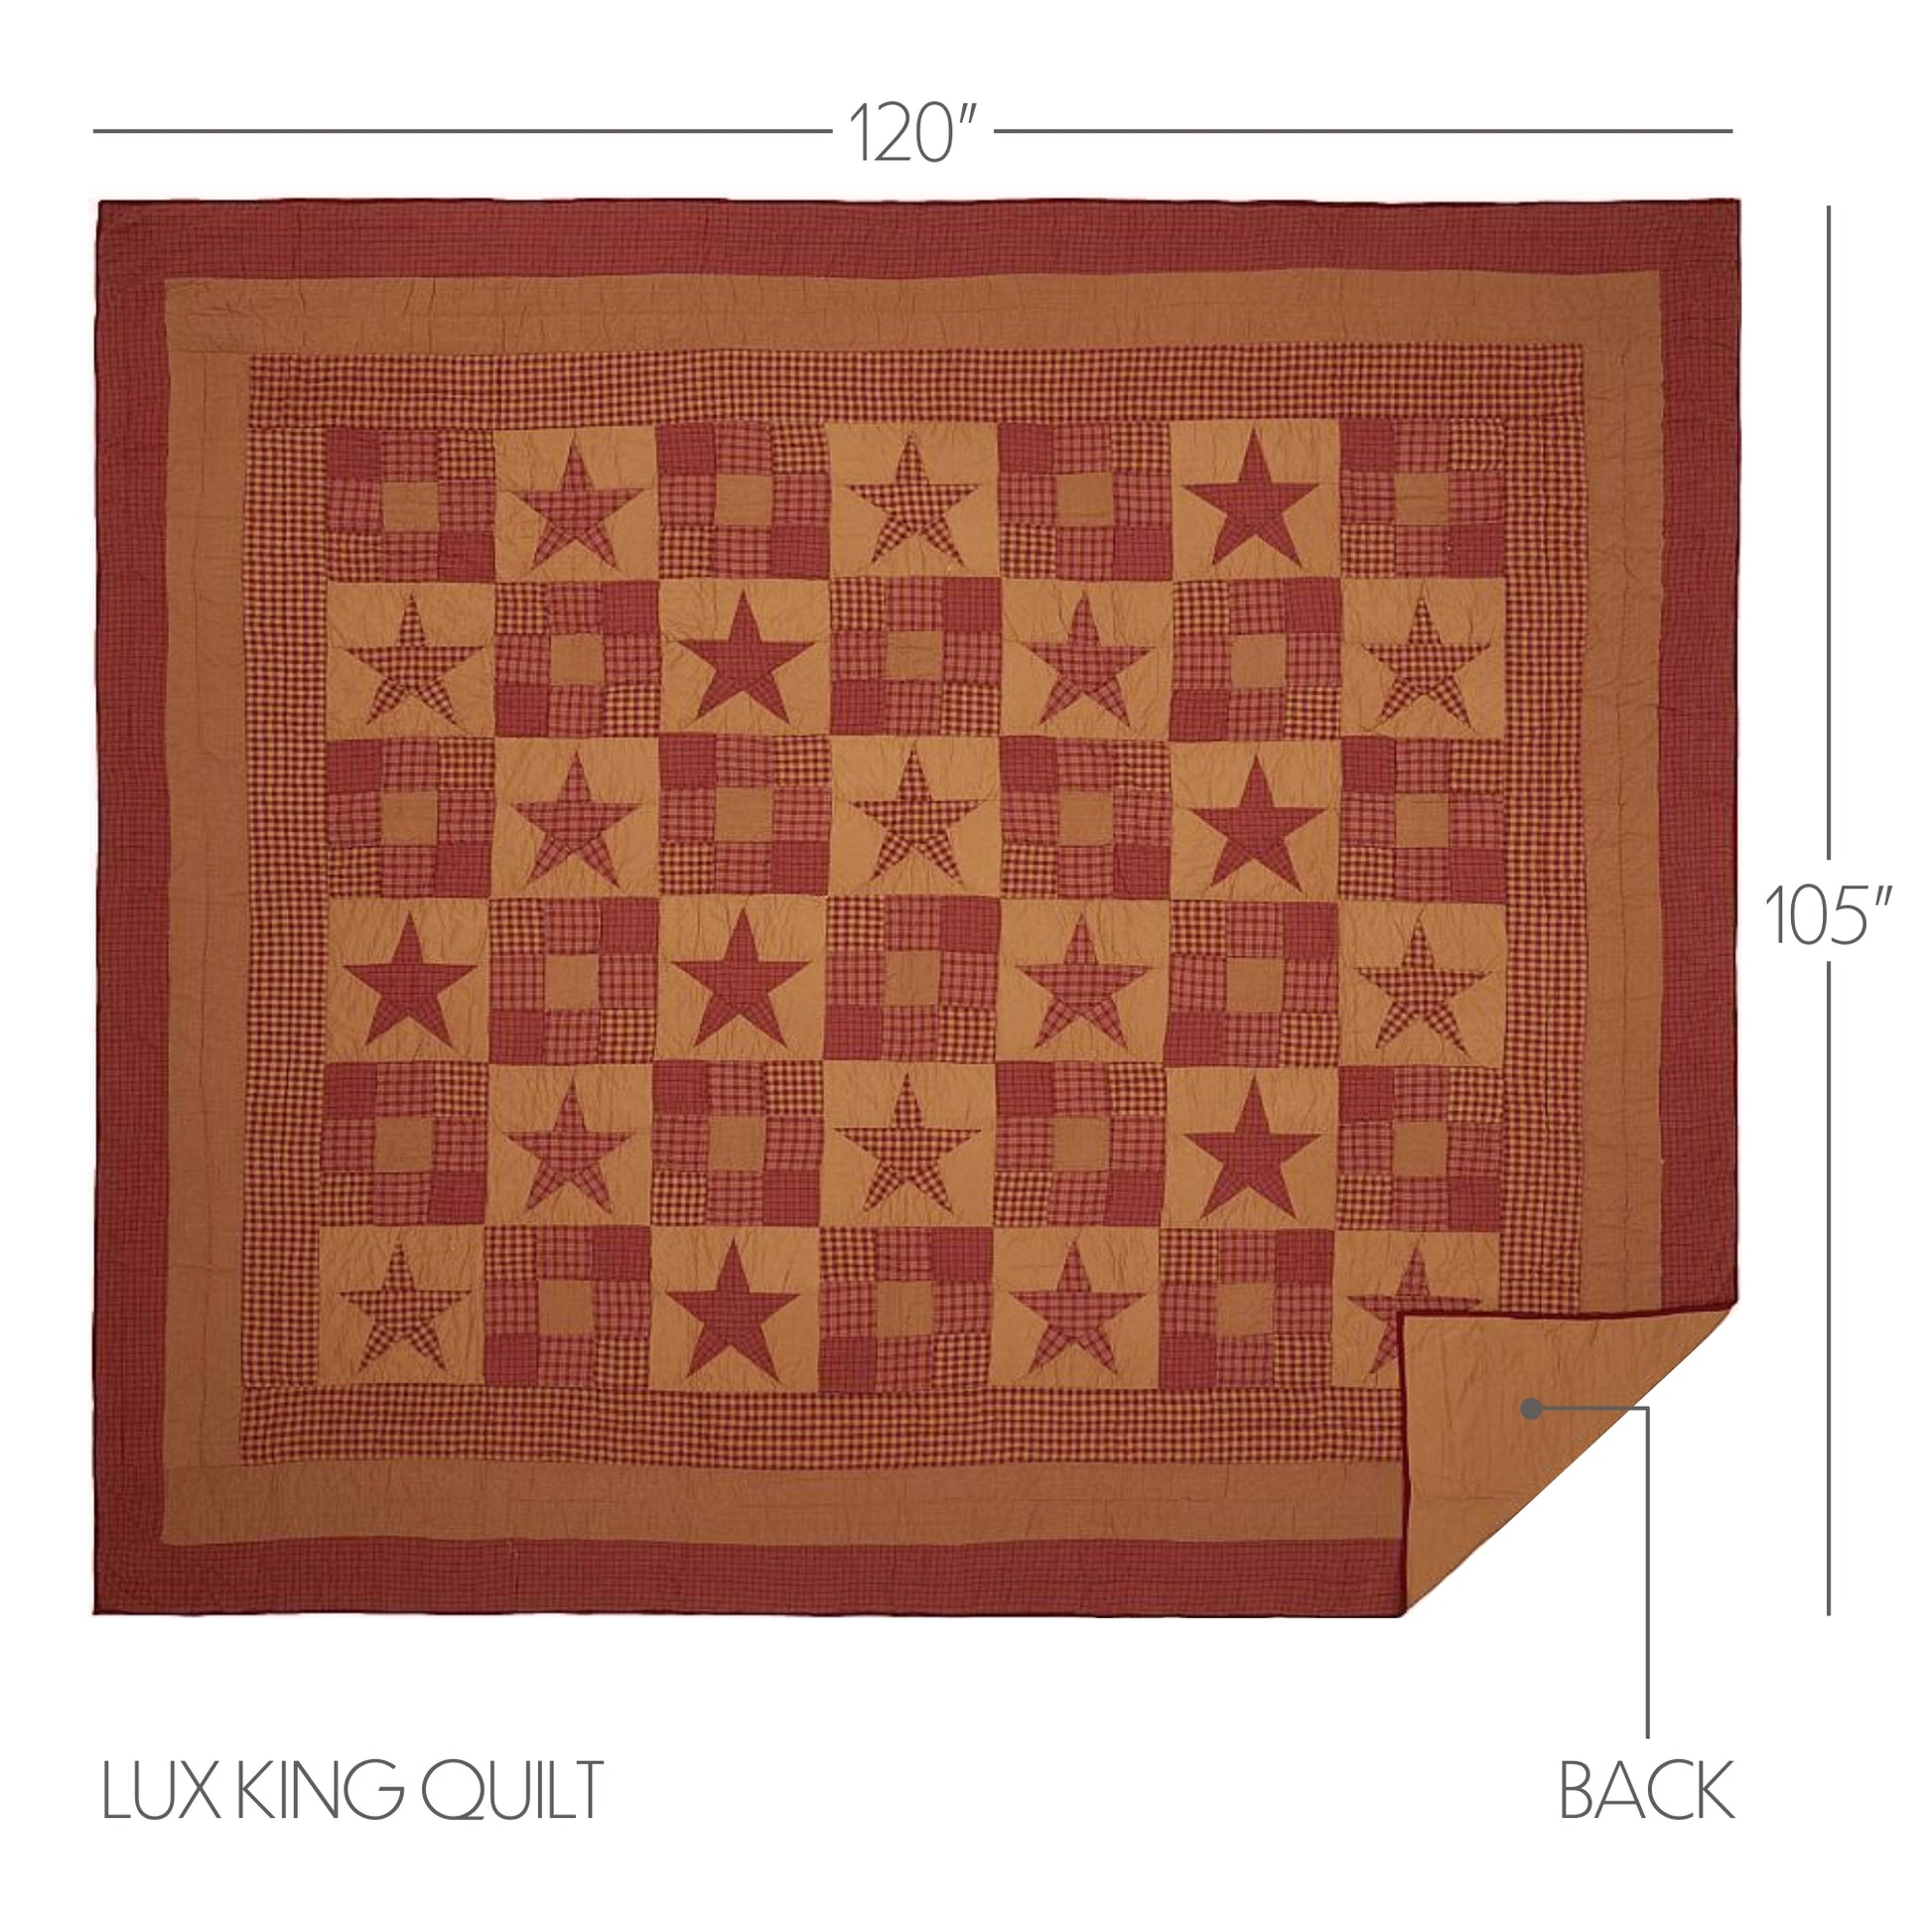 13609-Ninepatch-Star-Luxury-King-Quilt-120Wx105L-image-1